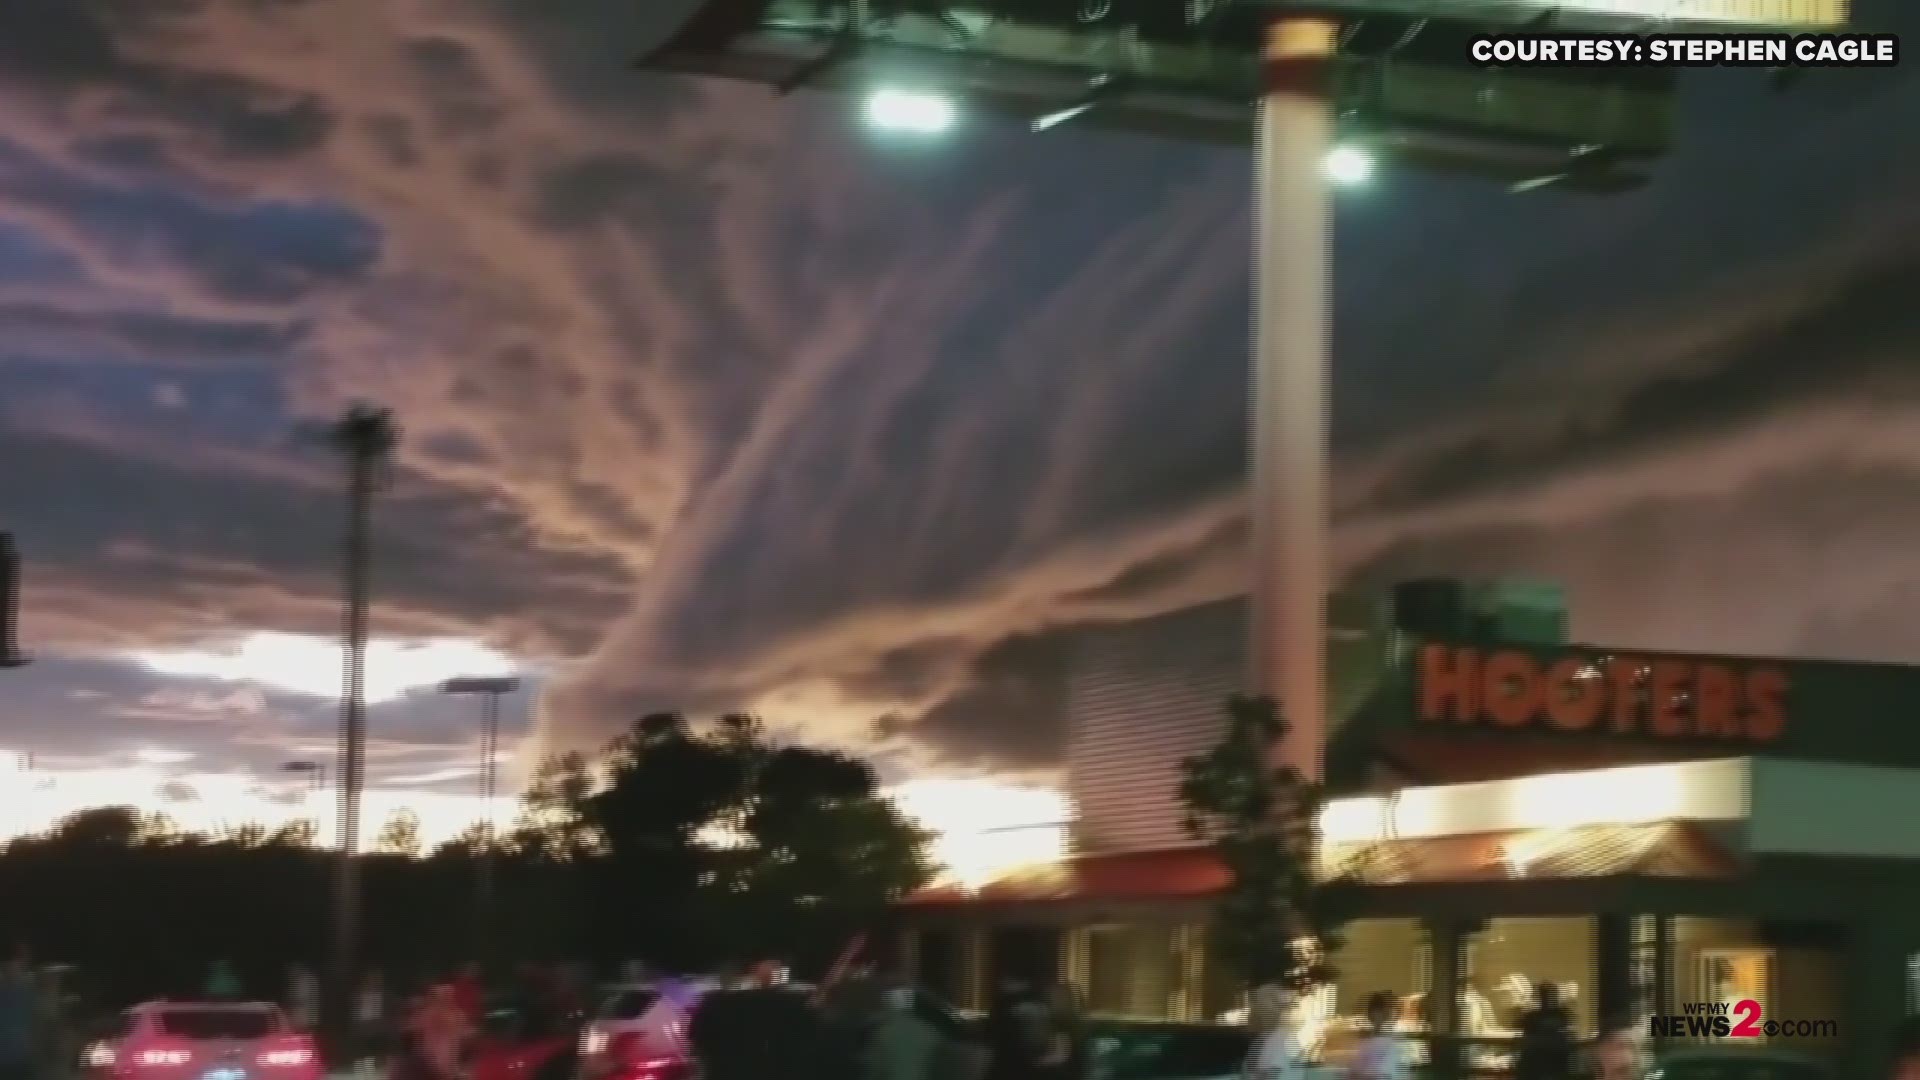 YIKES! THIS IS EERIE! You're looking at video of a shelf cloud moving out of a thunderstorm in Myrtle Beach! Thanks to Stephen Cagle for sharing this video!